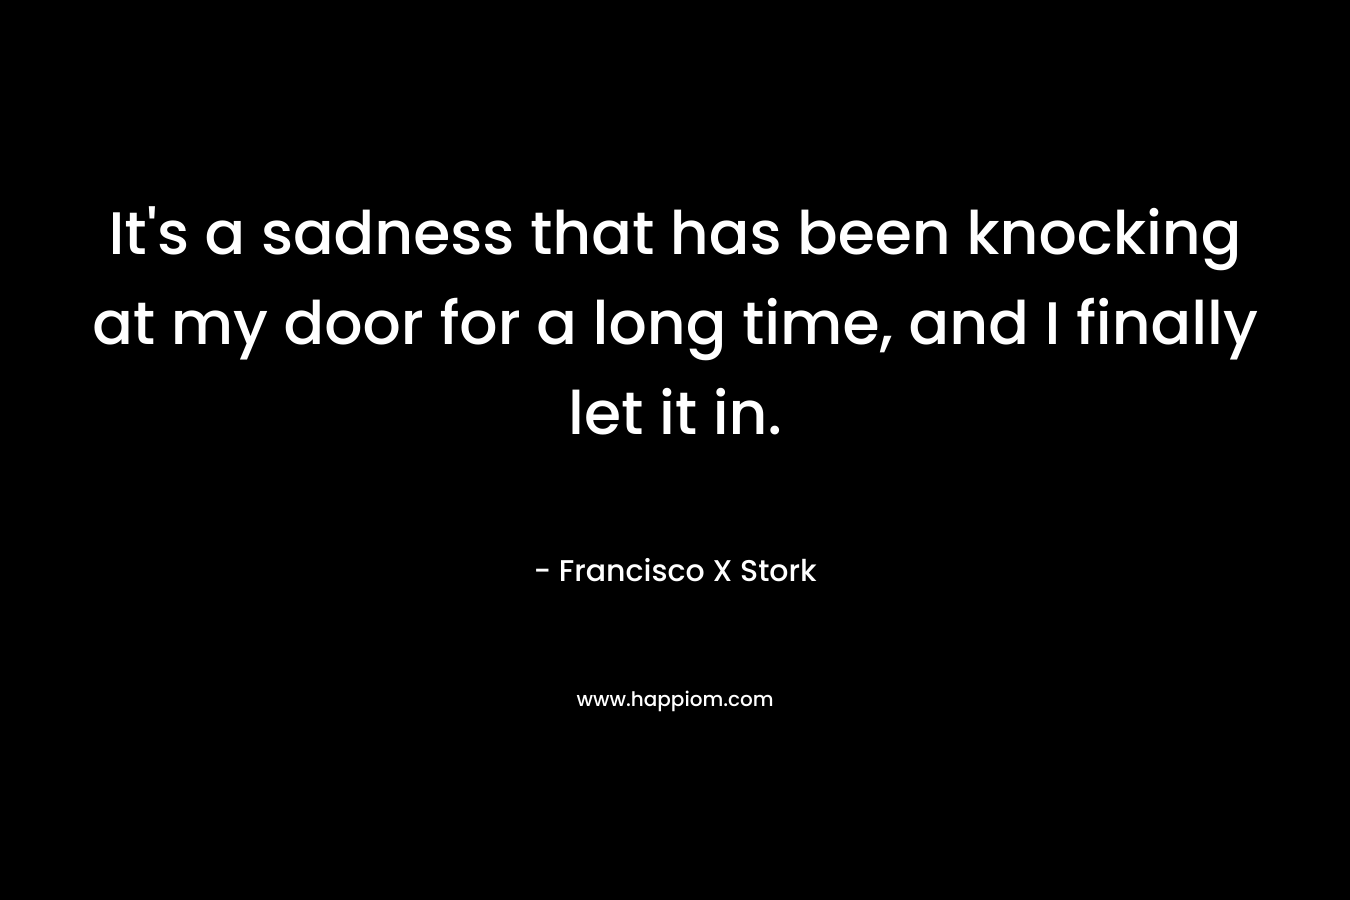 It’s a sadness that has been knocking at my door for a long time, and I finally let it in. – Francisco X Stork